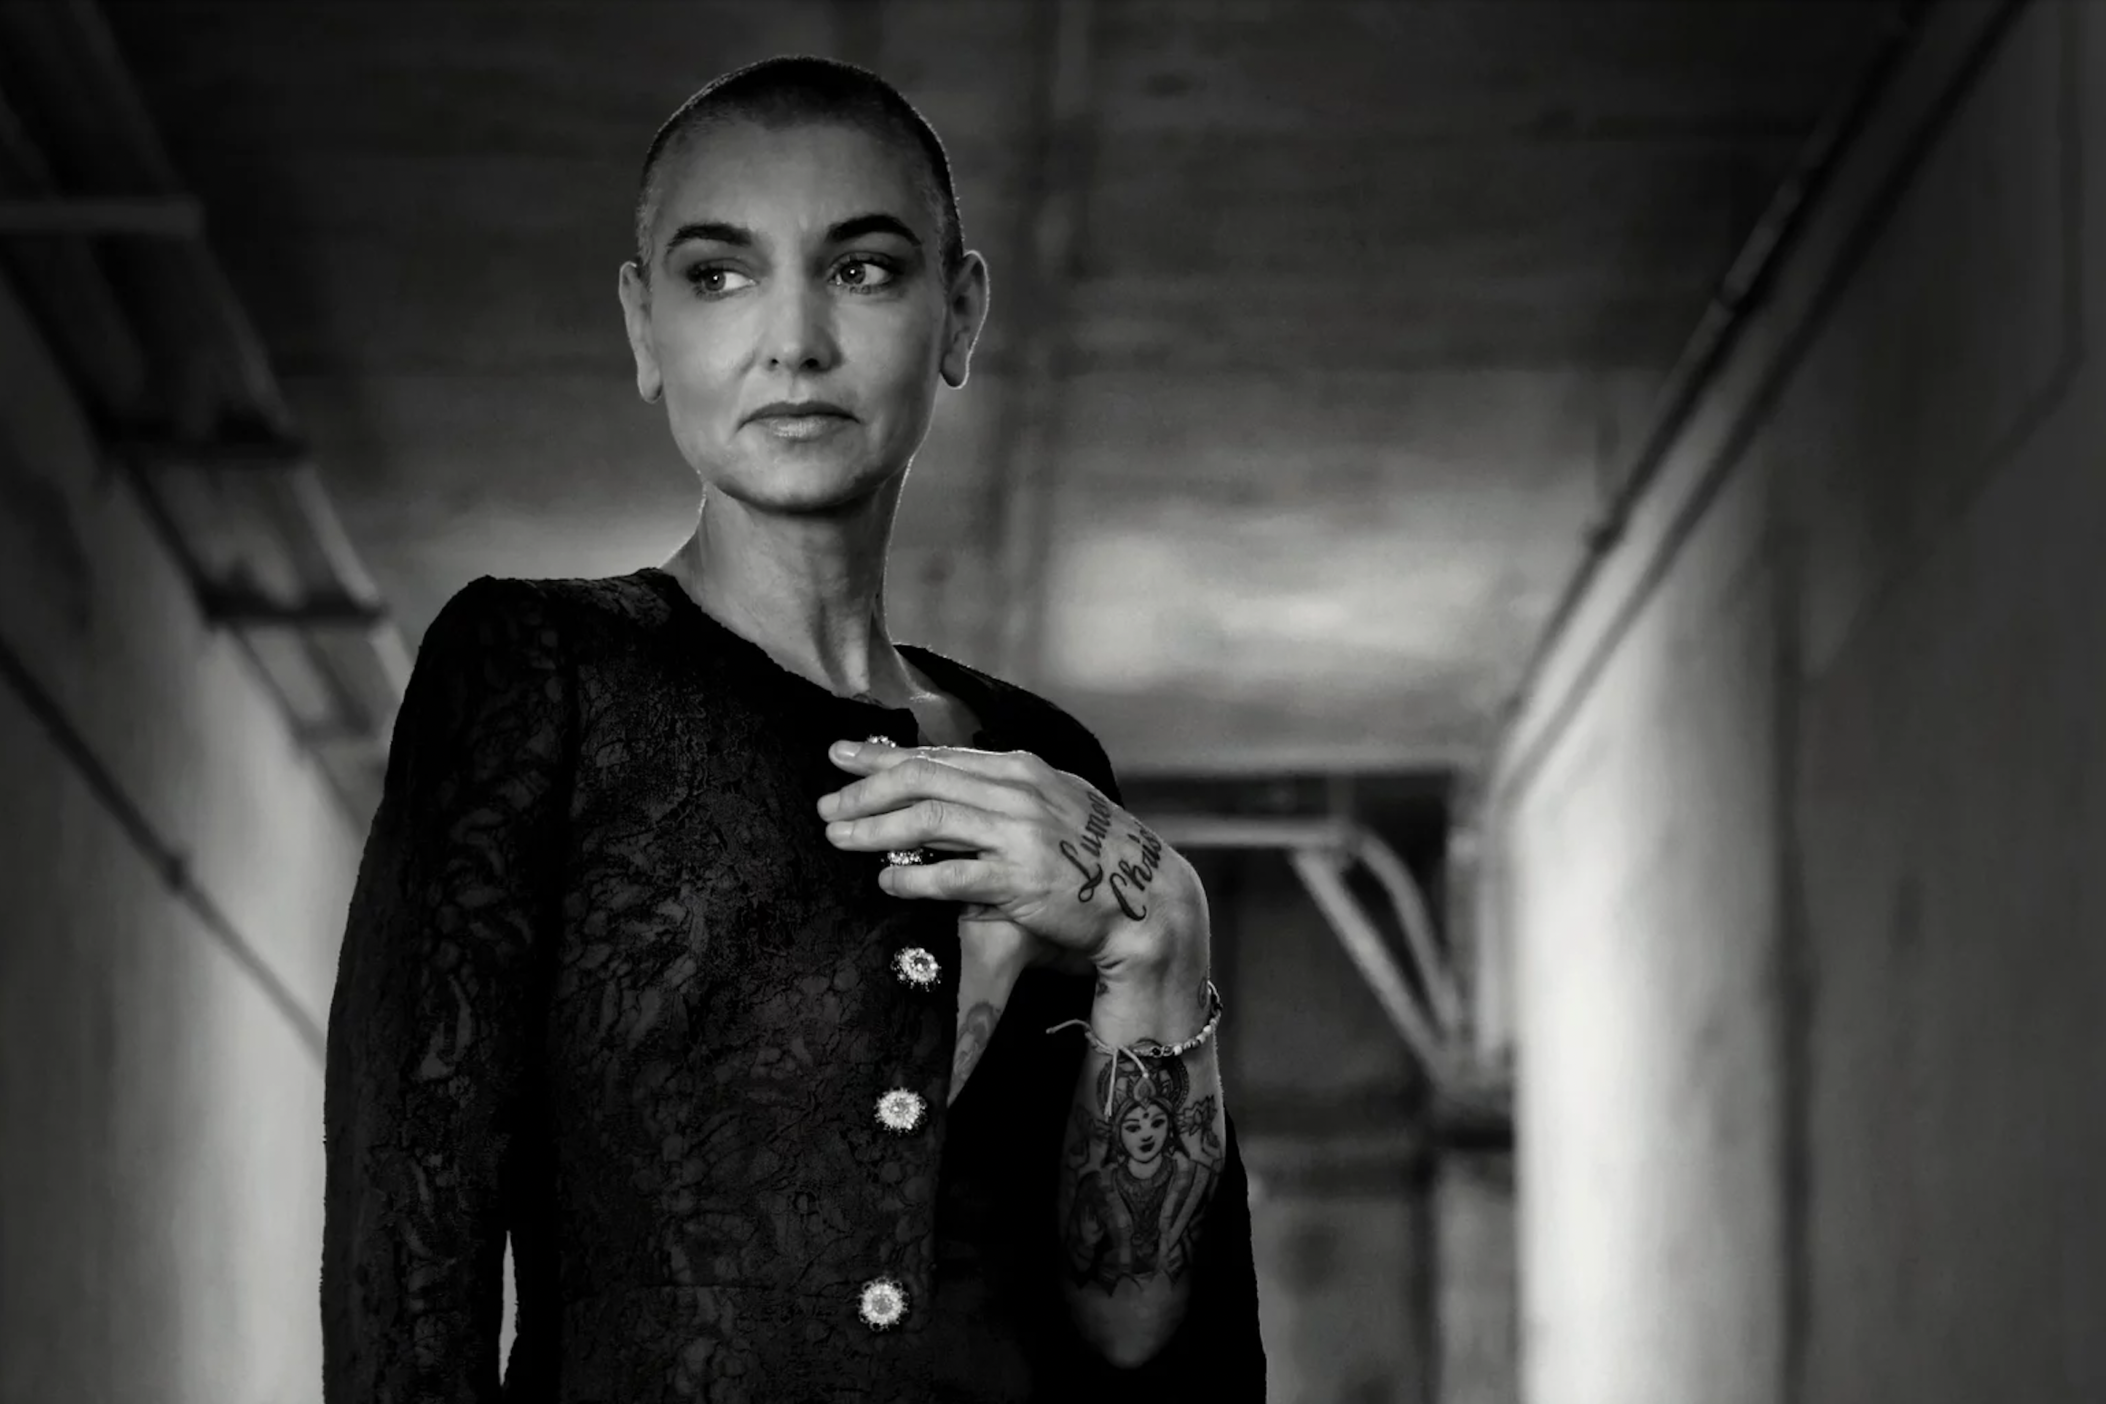 Sinead O'Connor as pictured in a promotional photo for an NPR review of her 2014 album, "I'm Not Bossy, I'm The Boss."